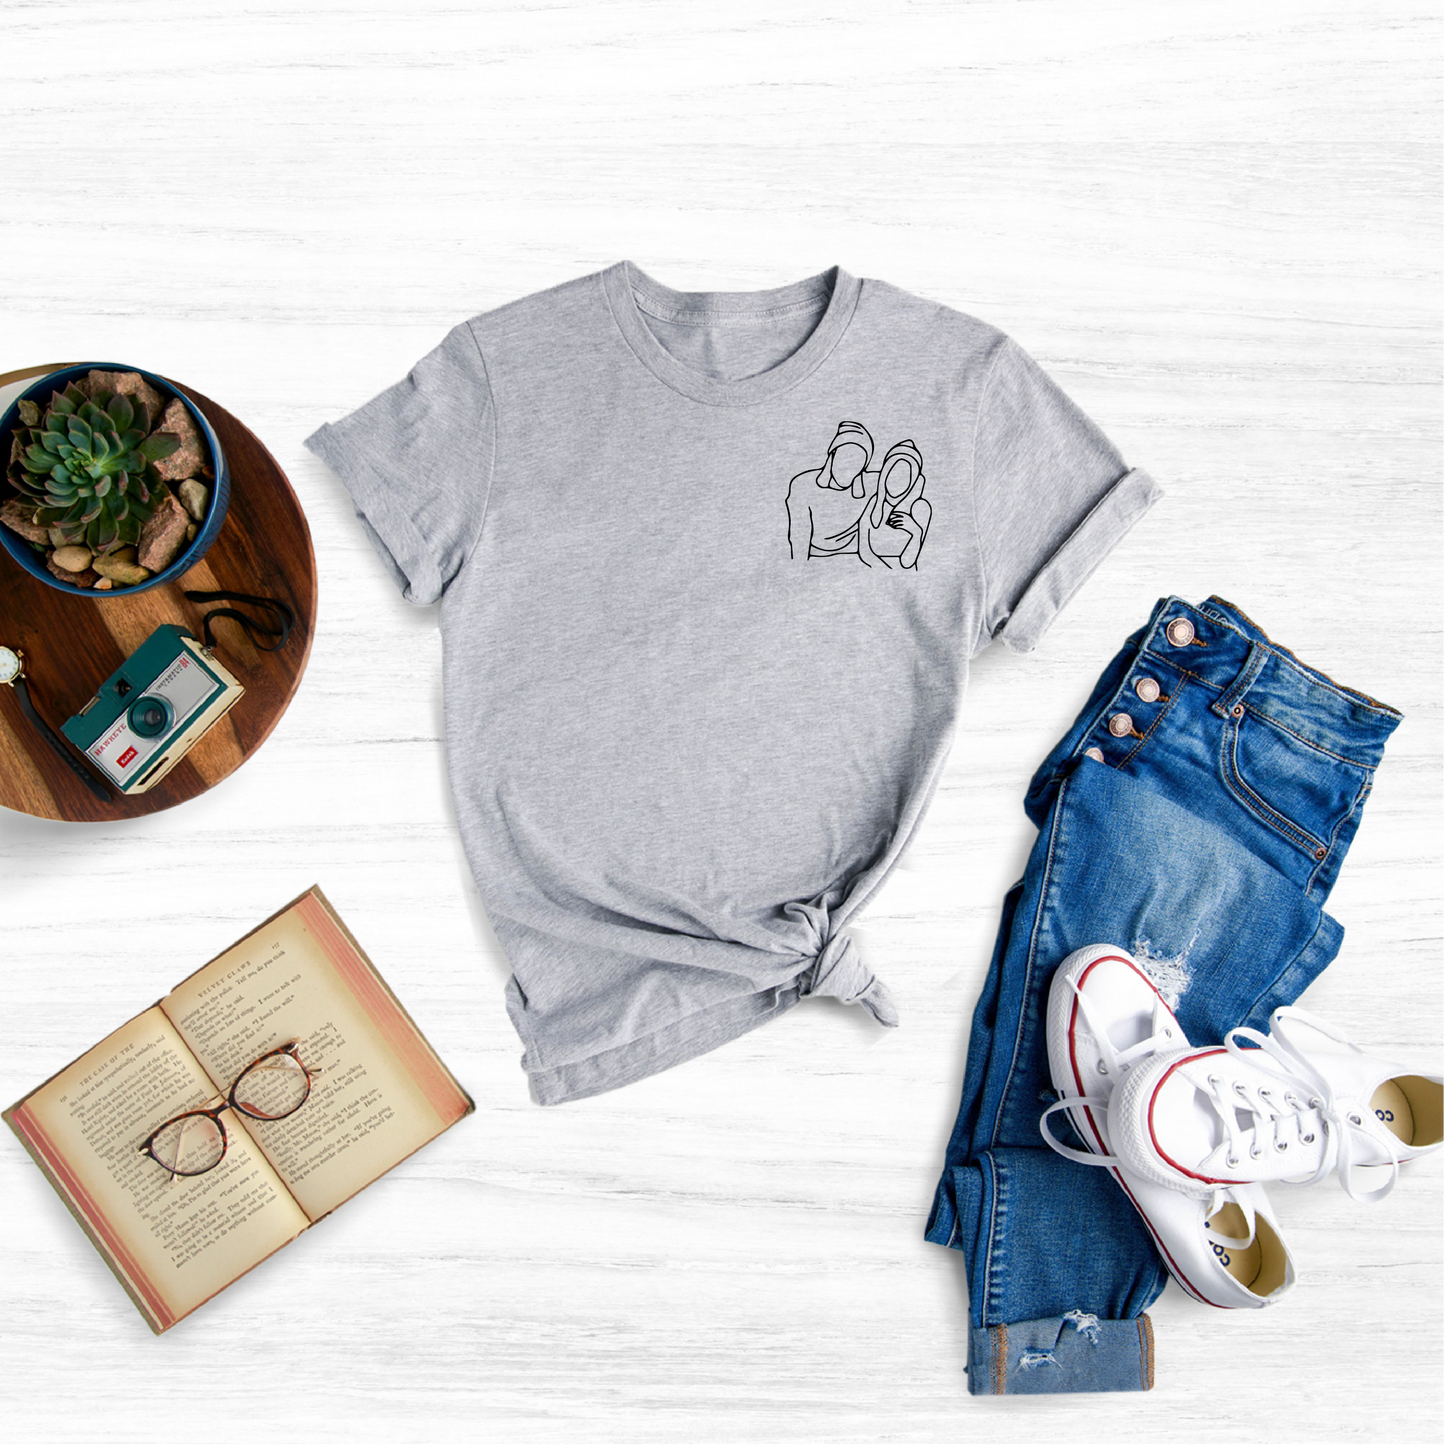 Capture and cherish your precious memories with our one-of-a-kind Custom Portrait Embroidered Photo T-shirt or Sweatshirt, the perfect gift for Valentine's Day or any special occasion.